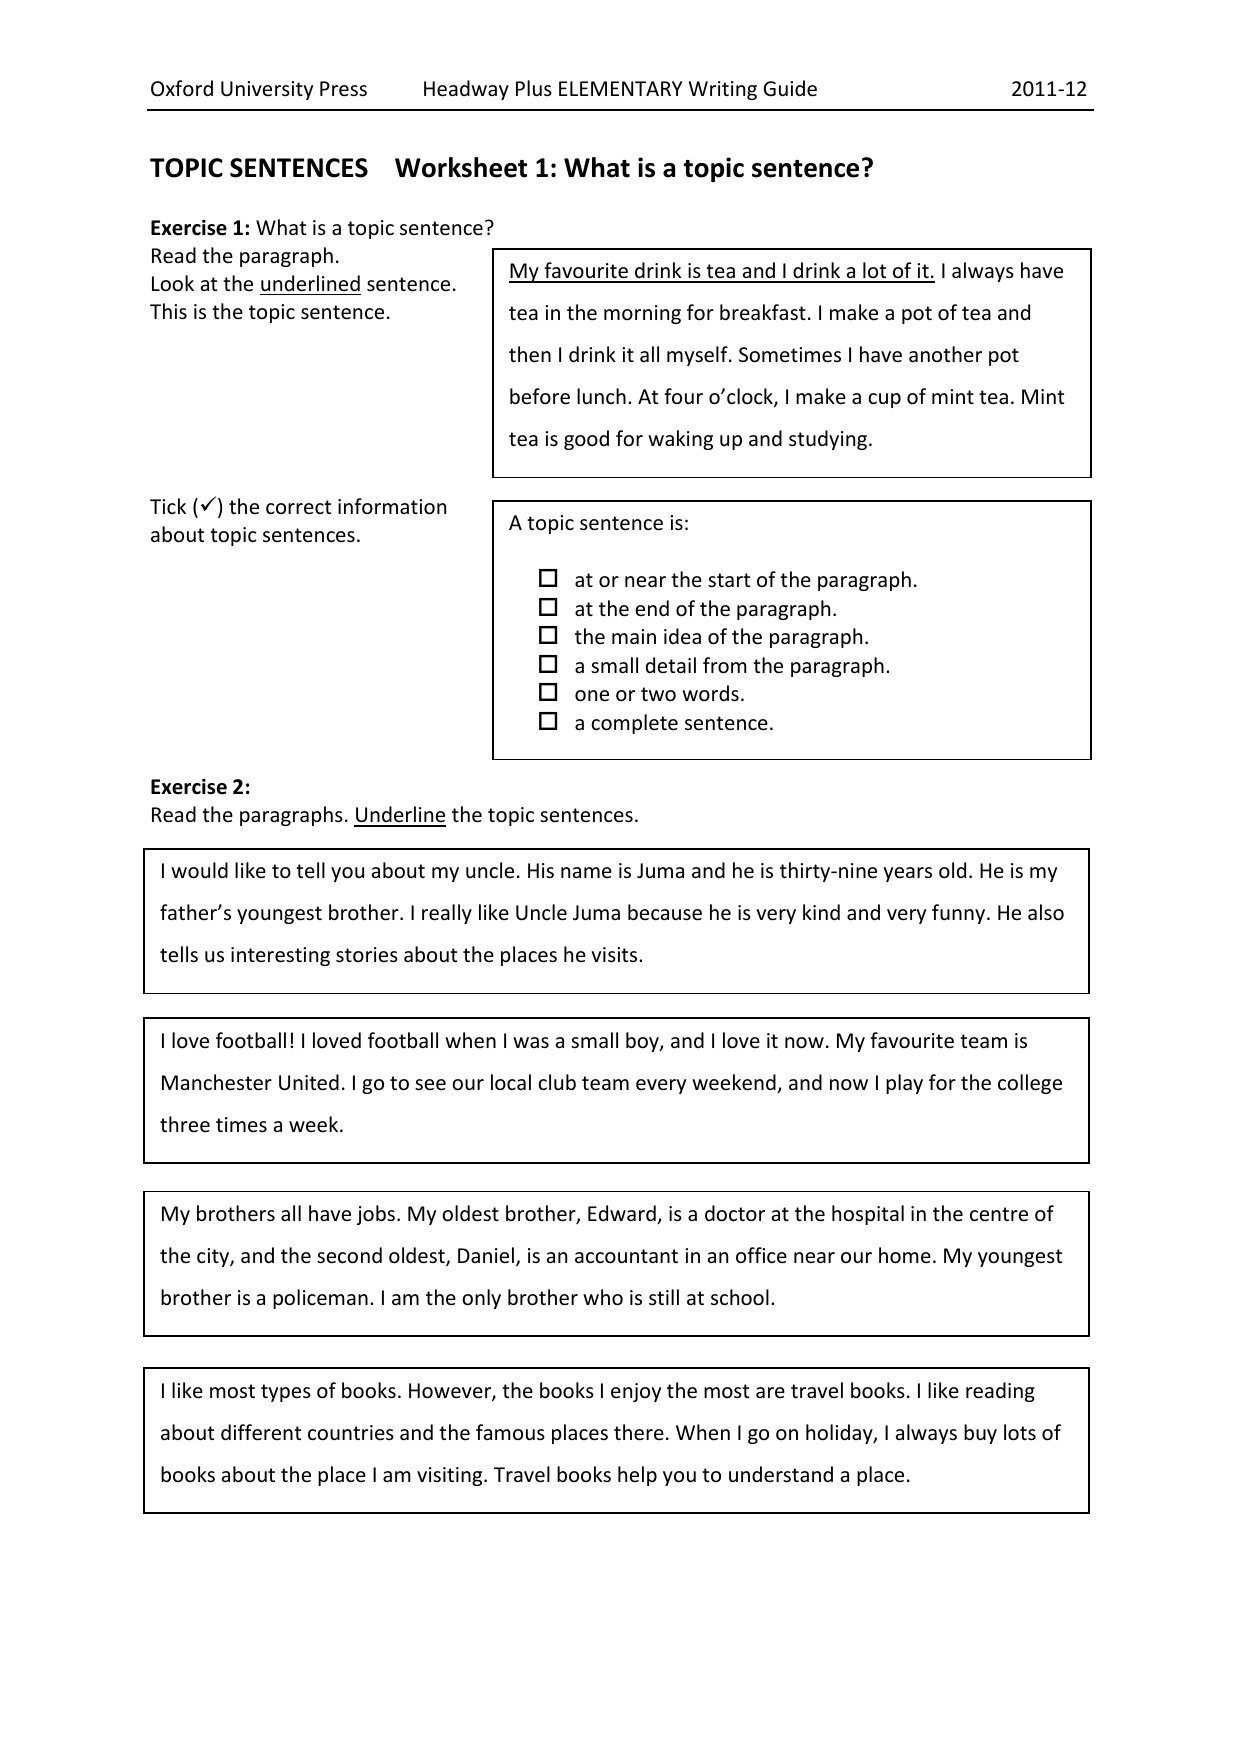 WRITING GUIDE Pertaining To Writing A Topic Sentence Worksheet